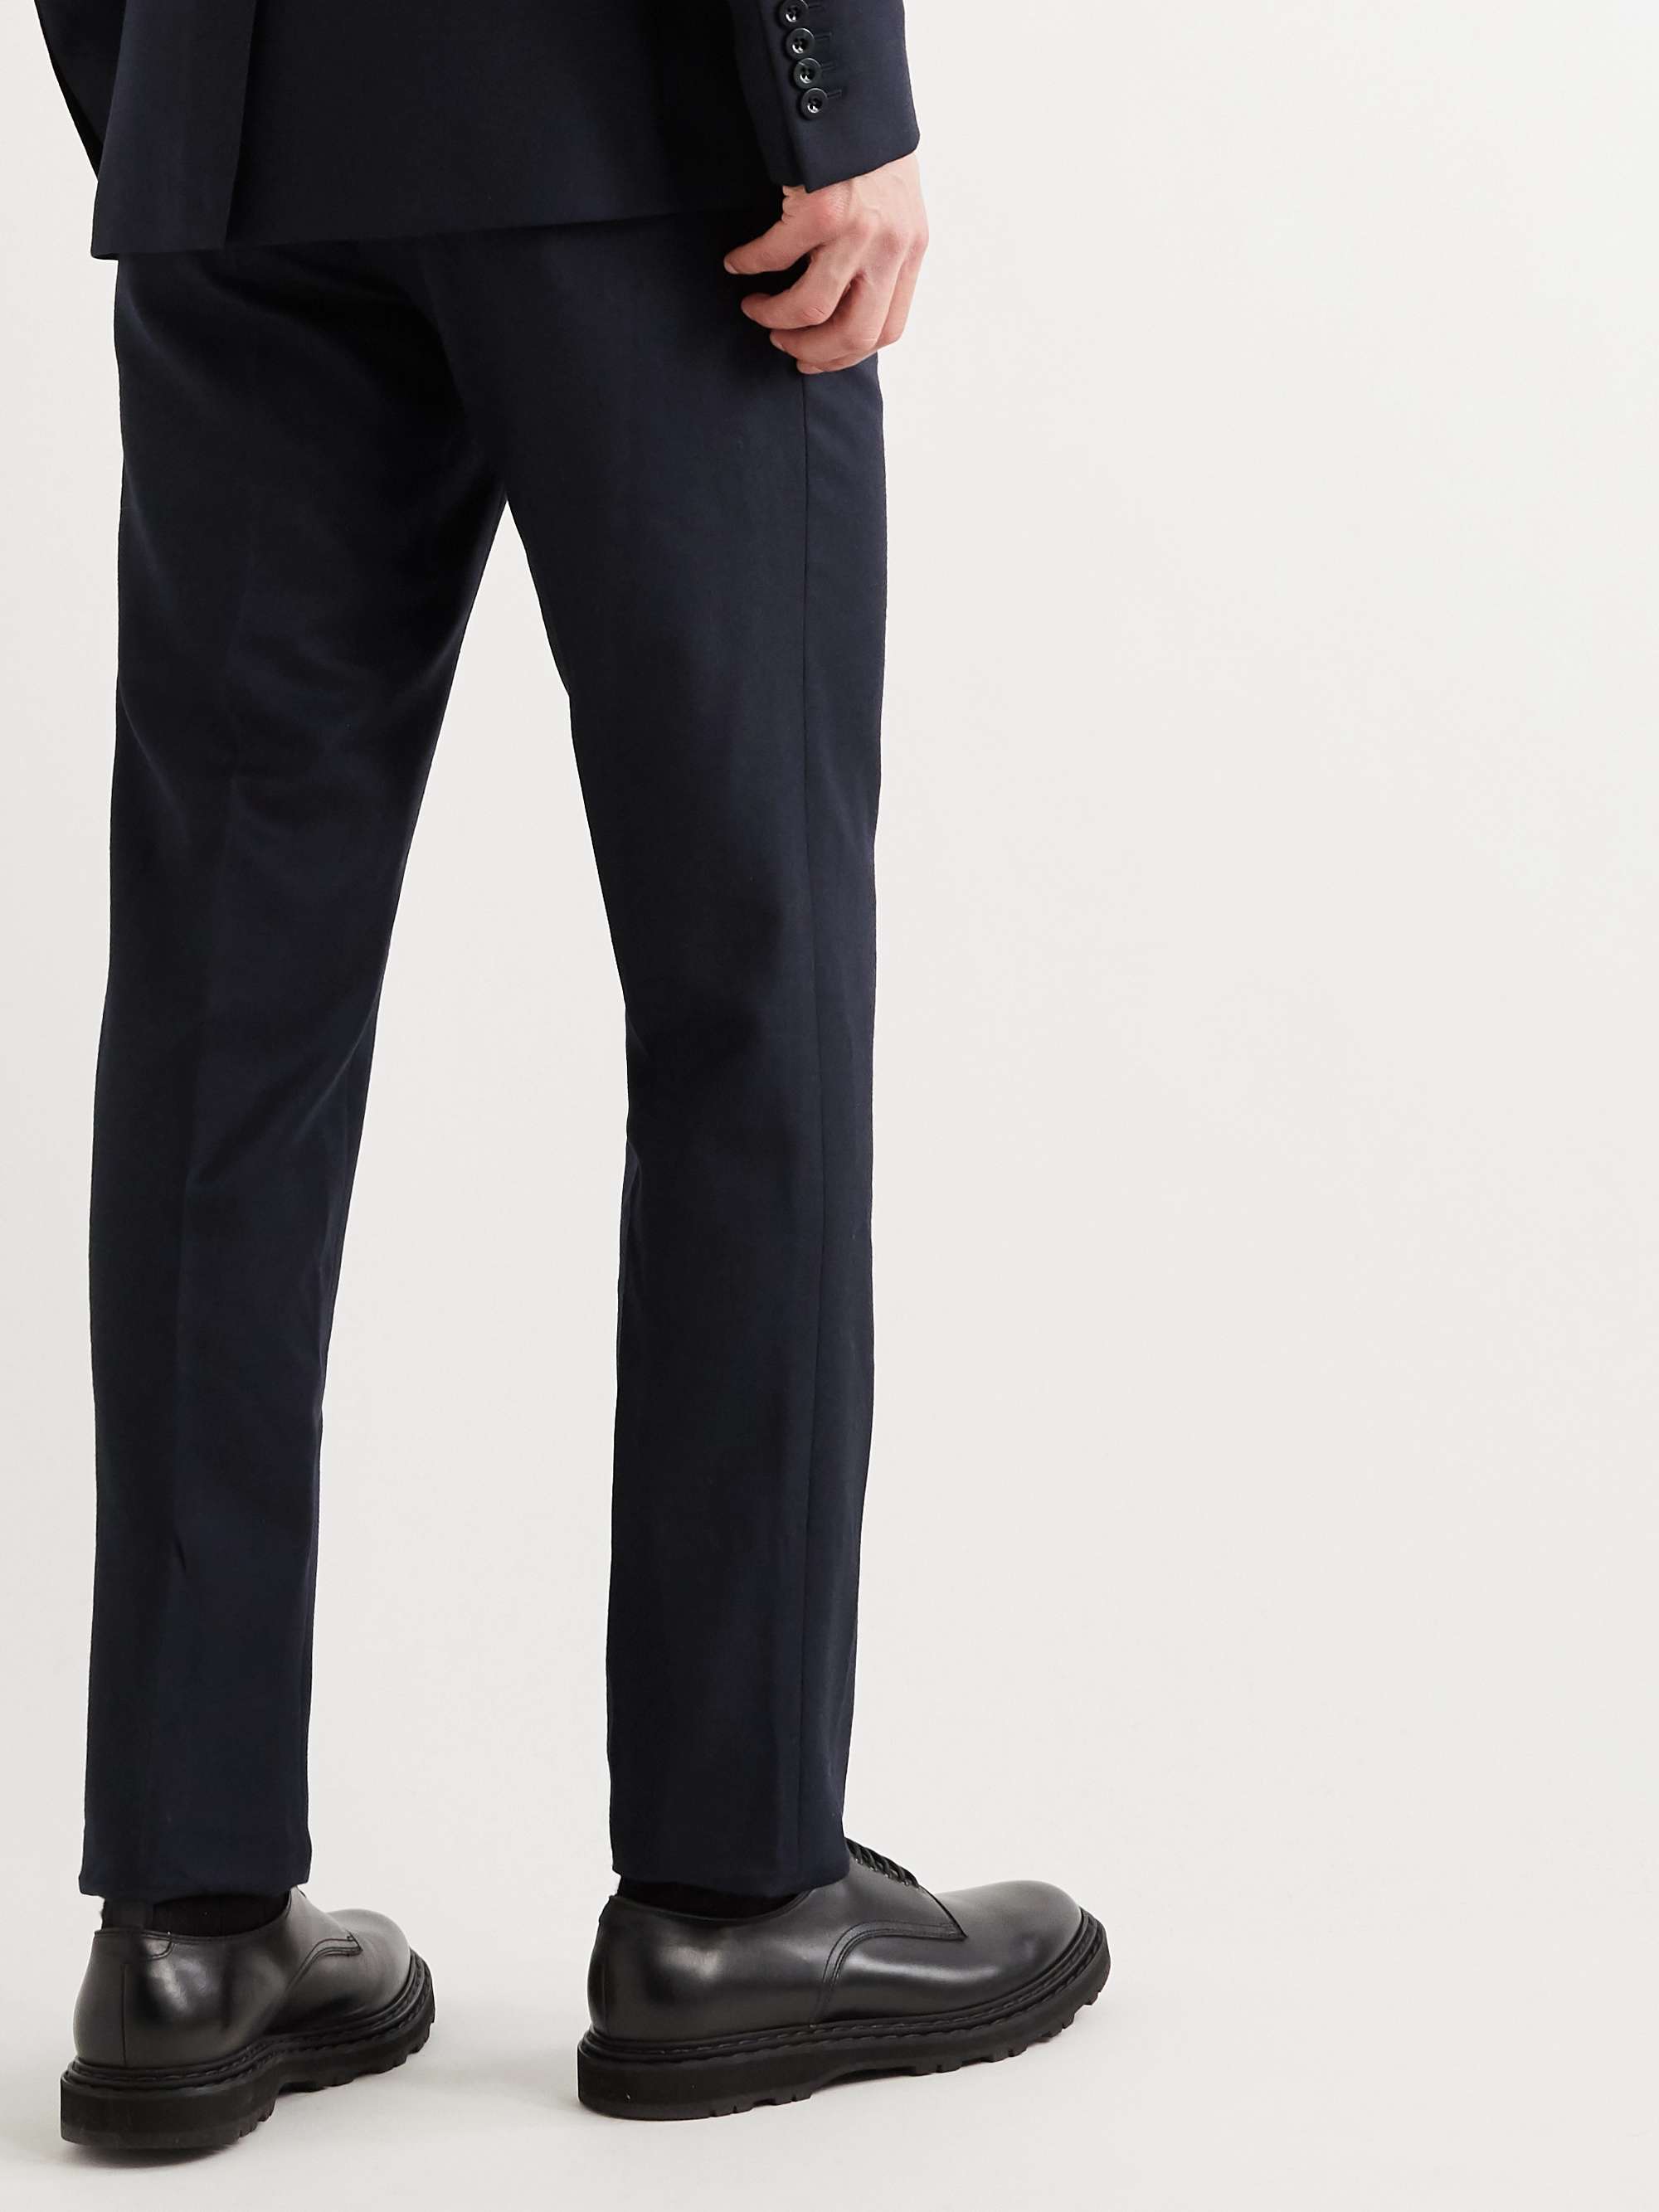 MR P. Slim-Fit Grey Worsted Wool Trousers